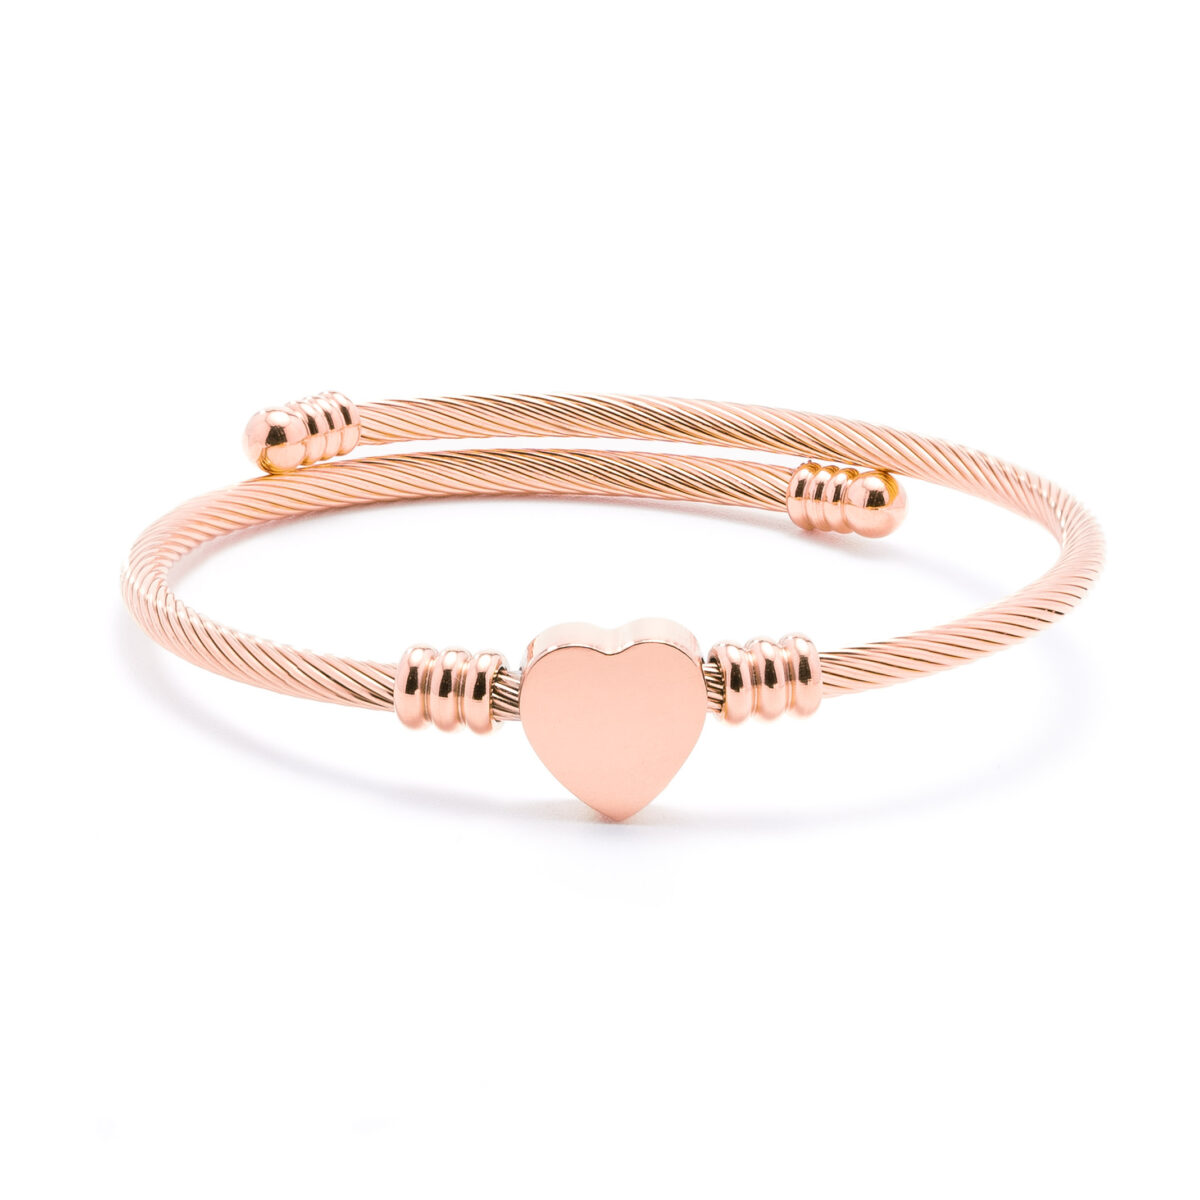 https://m.clubbella.co/product/rope-heart-rose-gold-bangle/ propro2